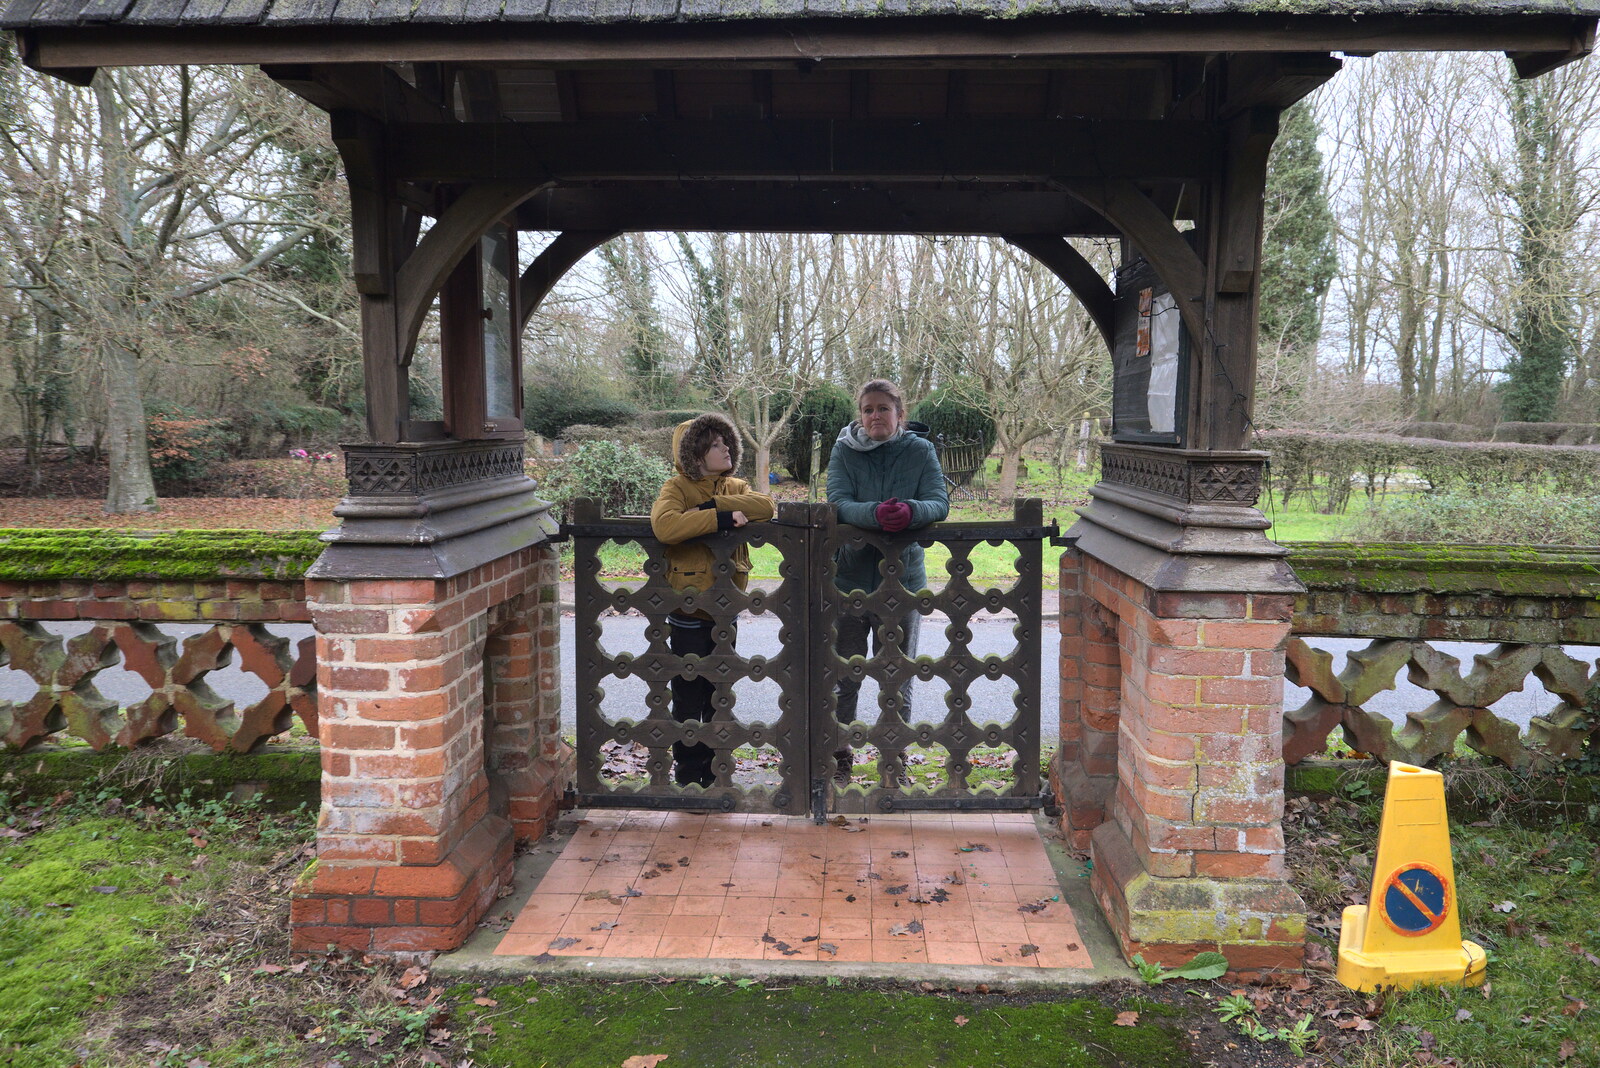 Winter Walks around Brome and Hoxne, Suffolk - 2nd January 2023: Harry and Isobel hang around on the lych gate